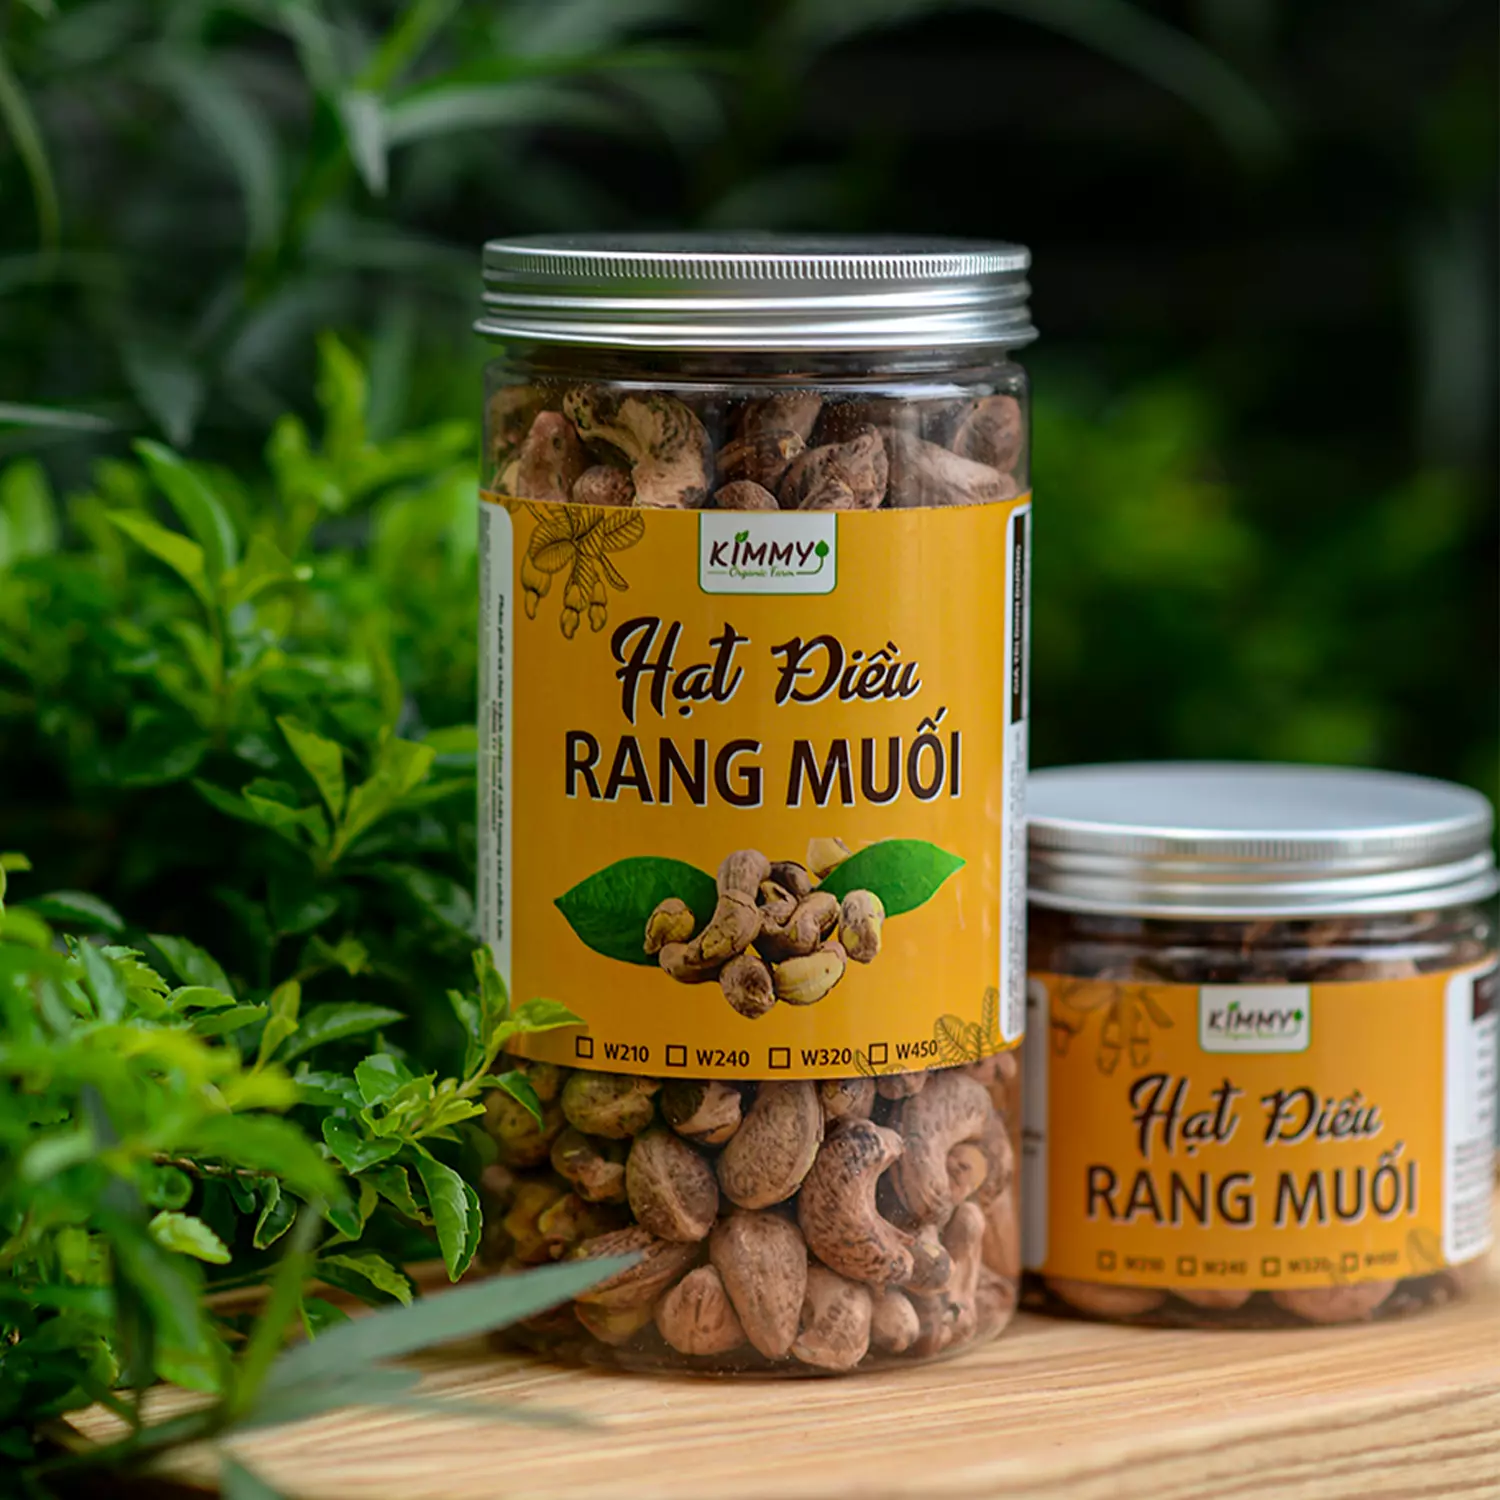 The Roasted Salted Cashew Nuts With Testa 500G PET JAR! - KIMMY FARM